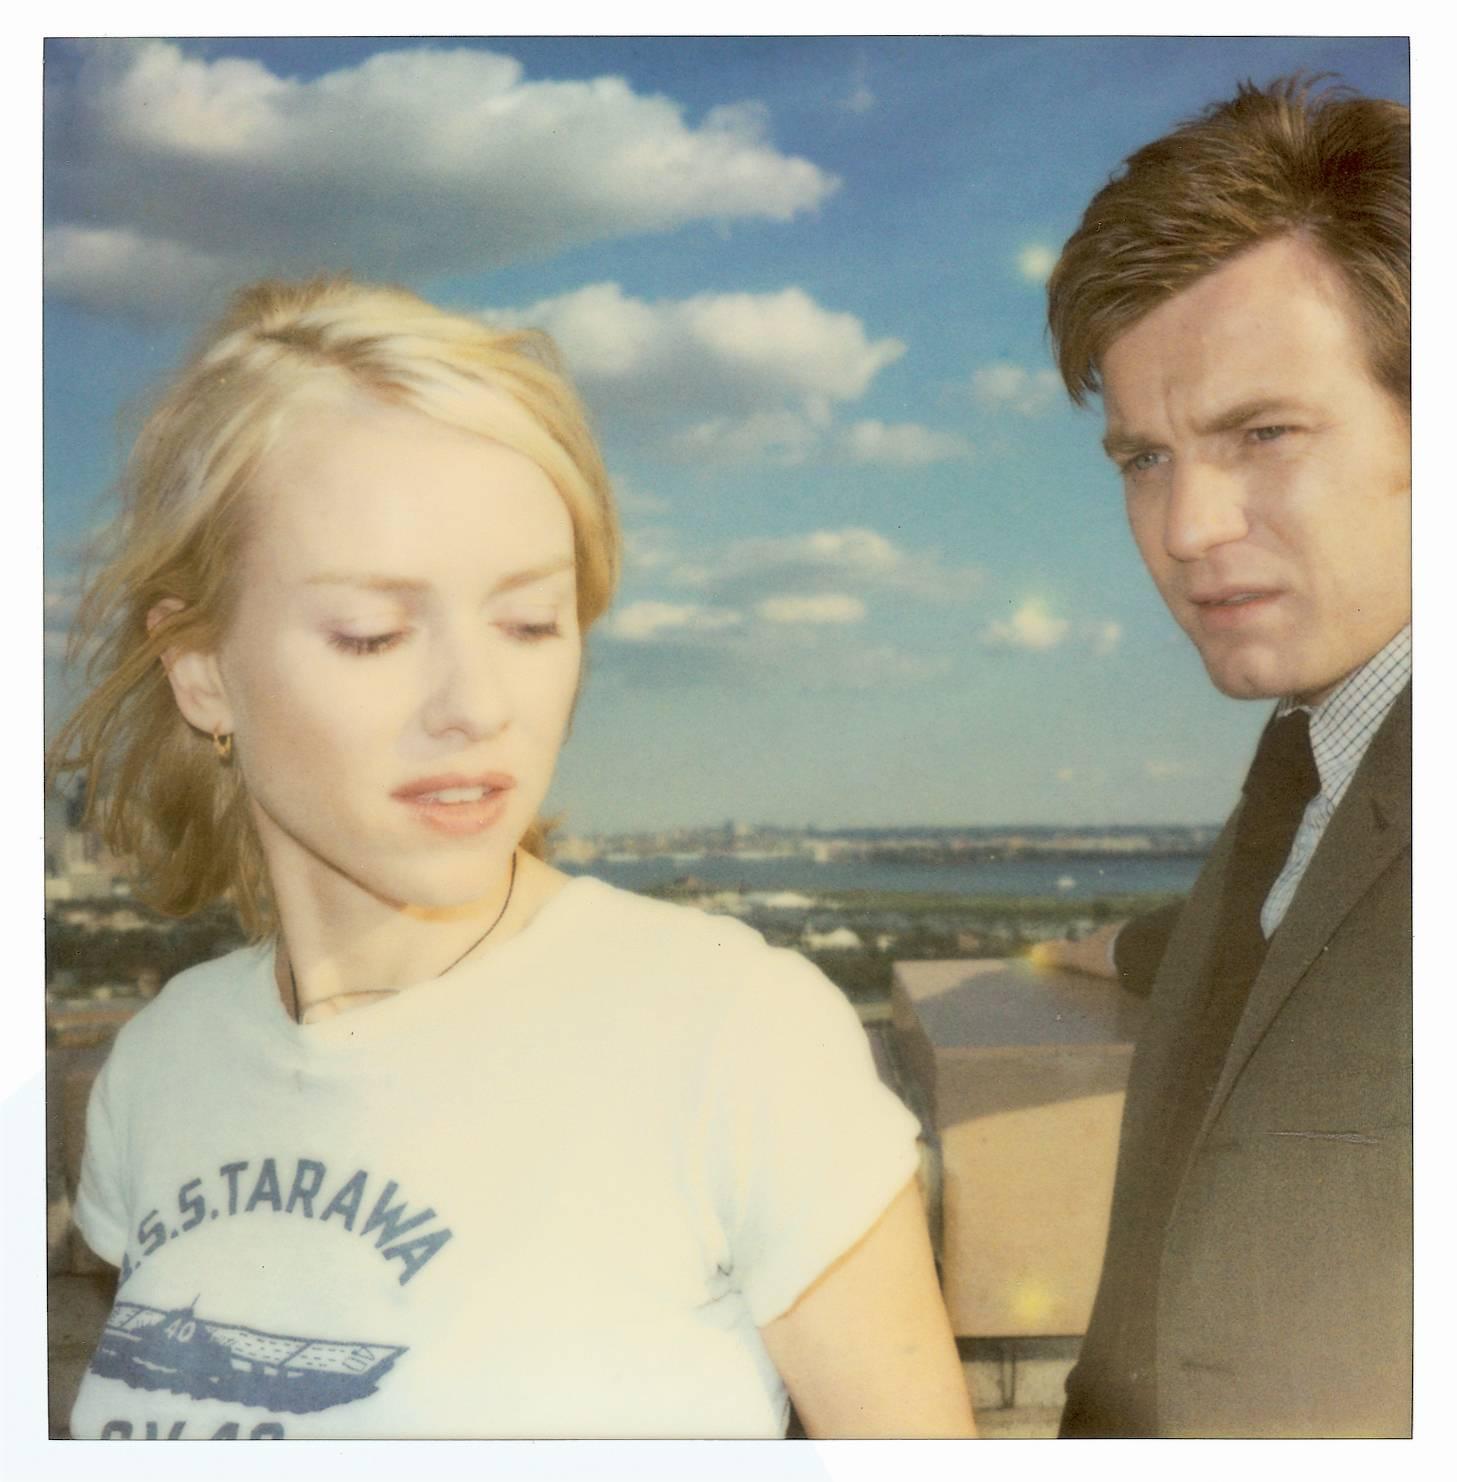 Lila and Sam from the movie Stay with Ewan McGregor, Naomi Watts, not mounted - Gray Portrait Photograph by Stefanie Schneider